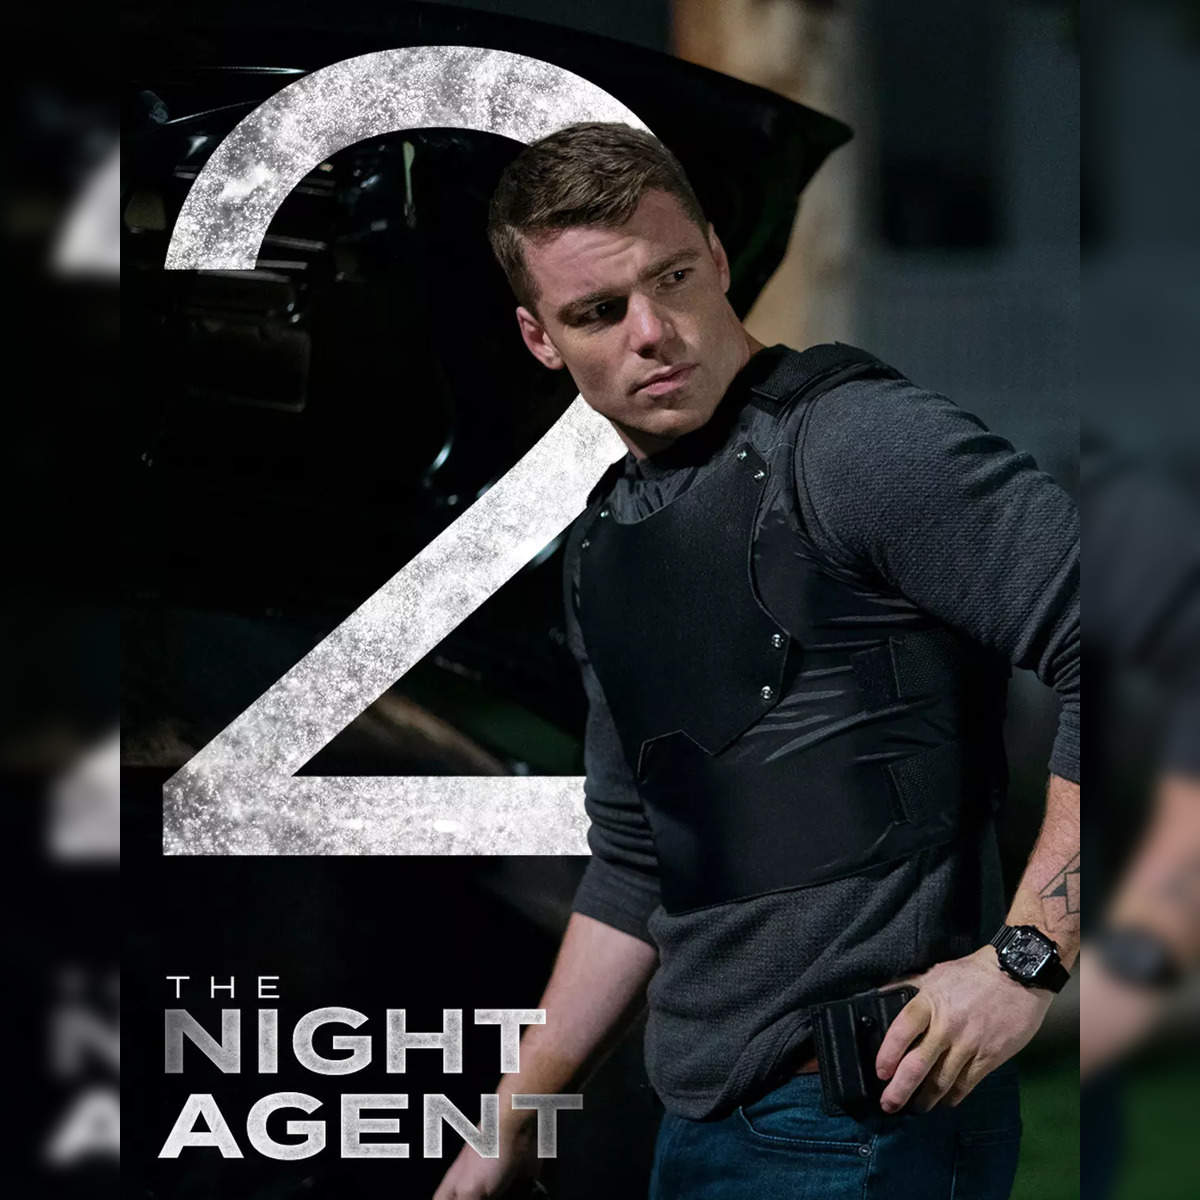 The Night Agent Season 2: The Night Agent Season 2 set to release ...